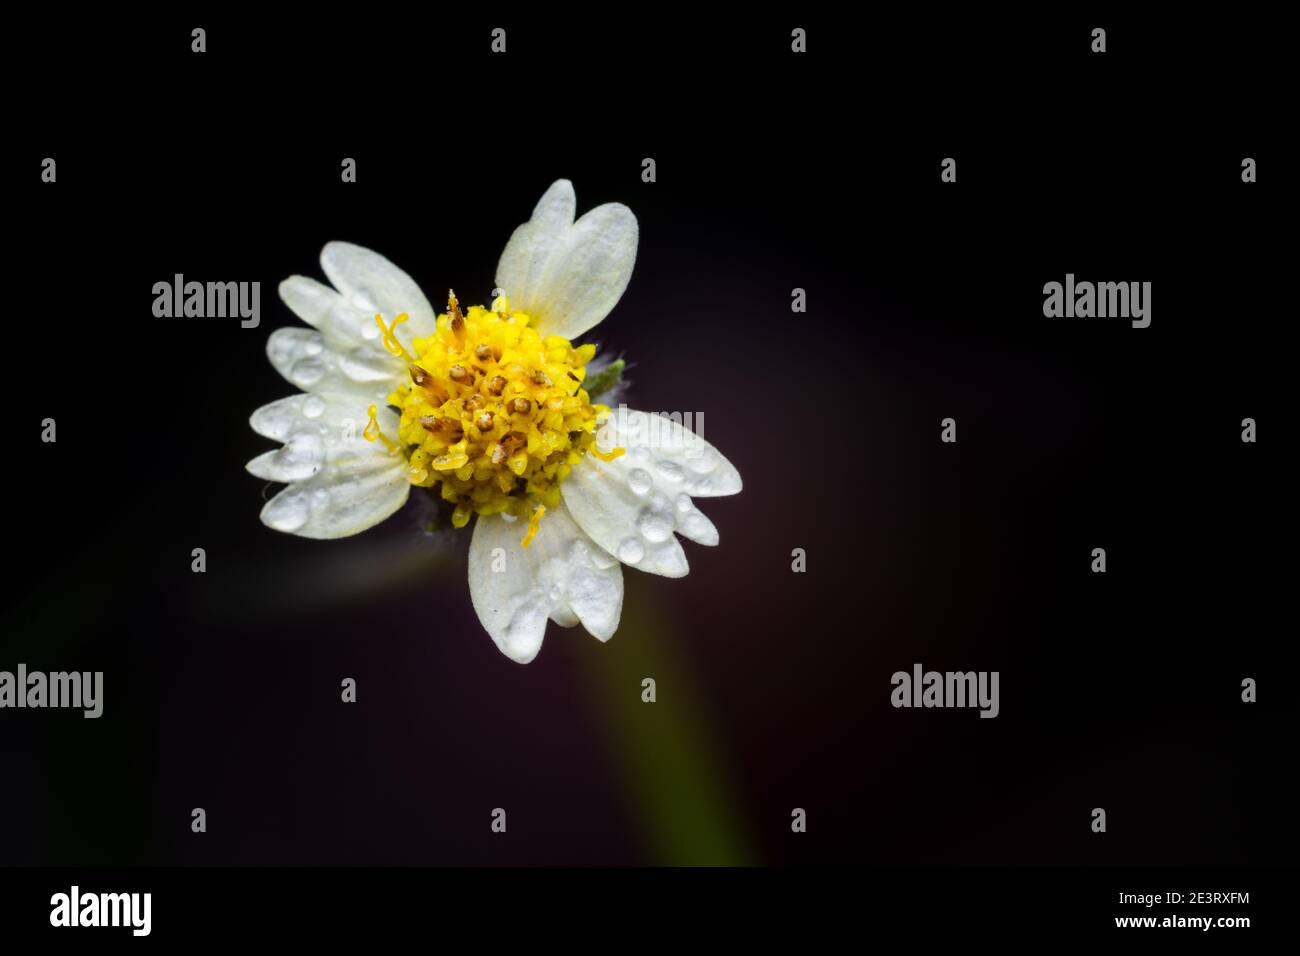 Tridax procumbens also known as coatbuttons or tridax daisy macro with raindrops on the white petals and black background Stock Photo